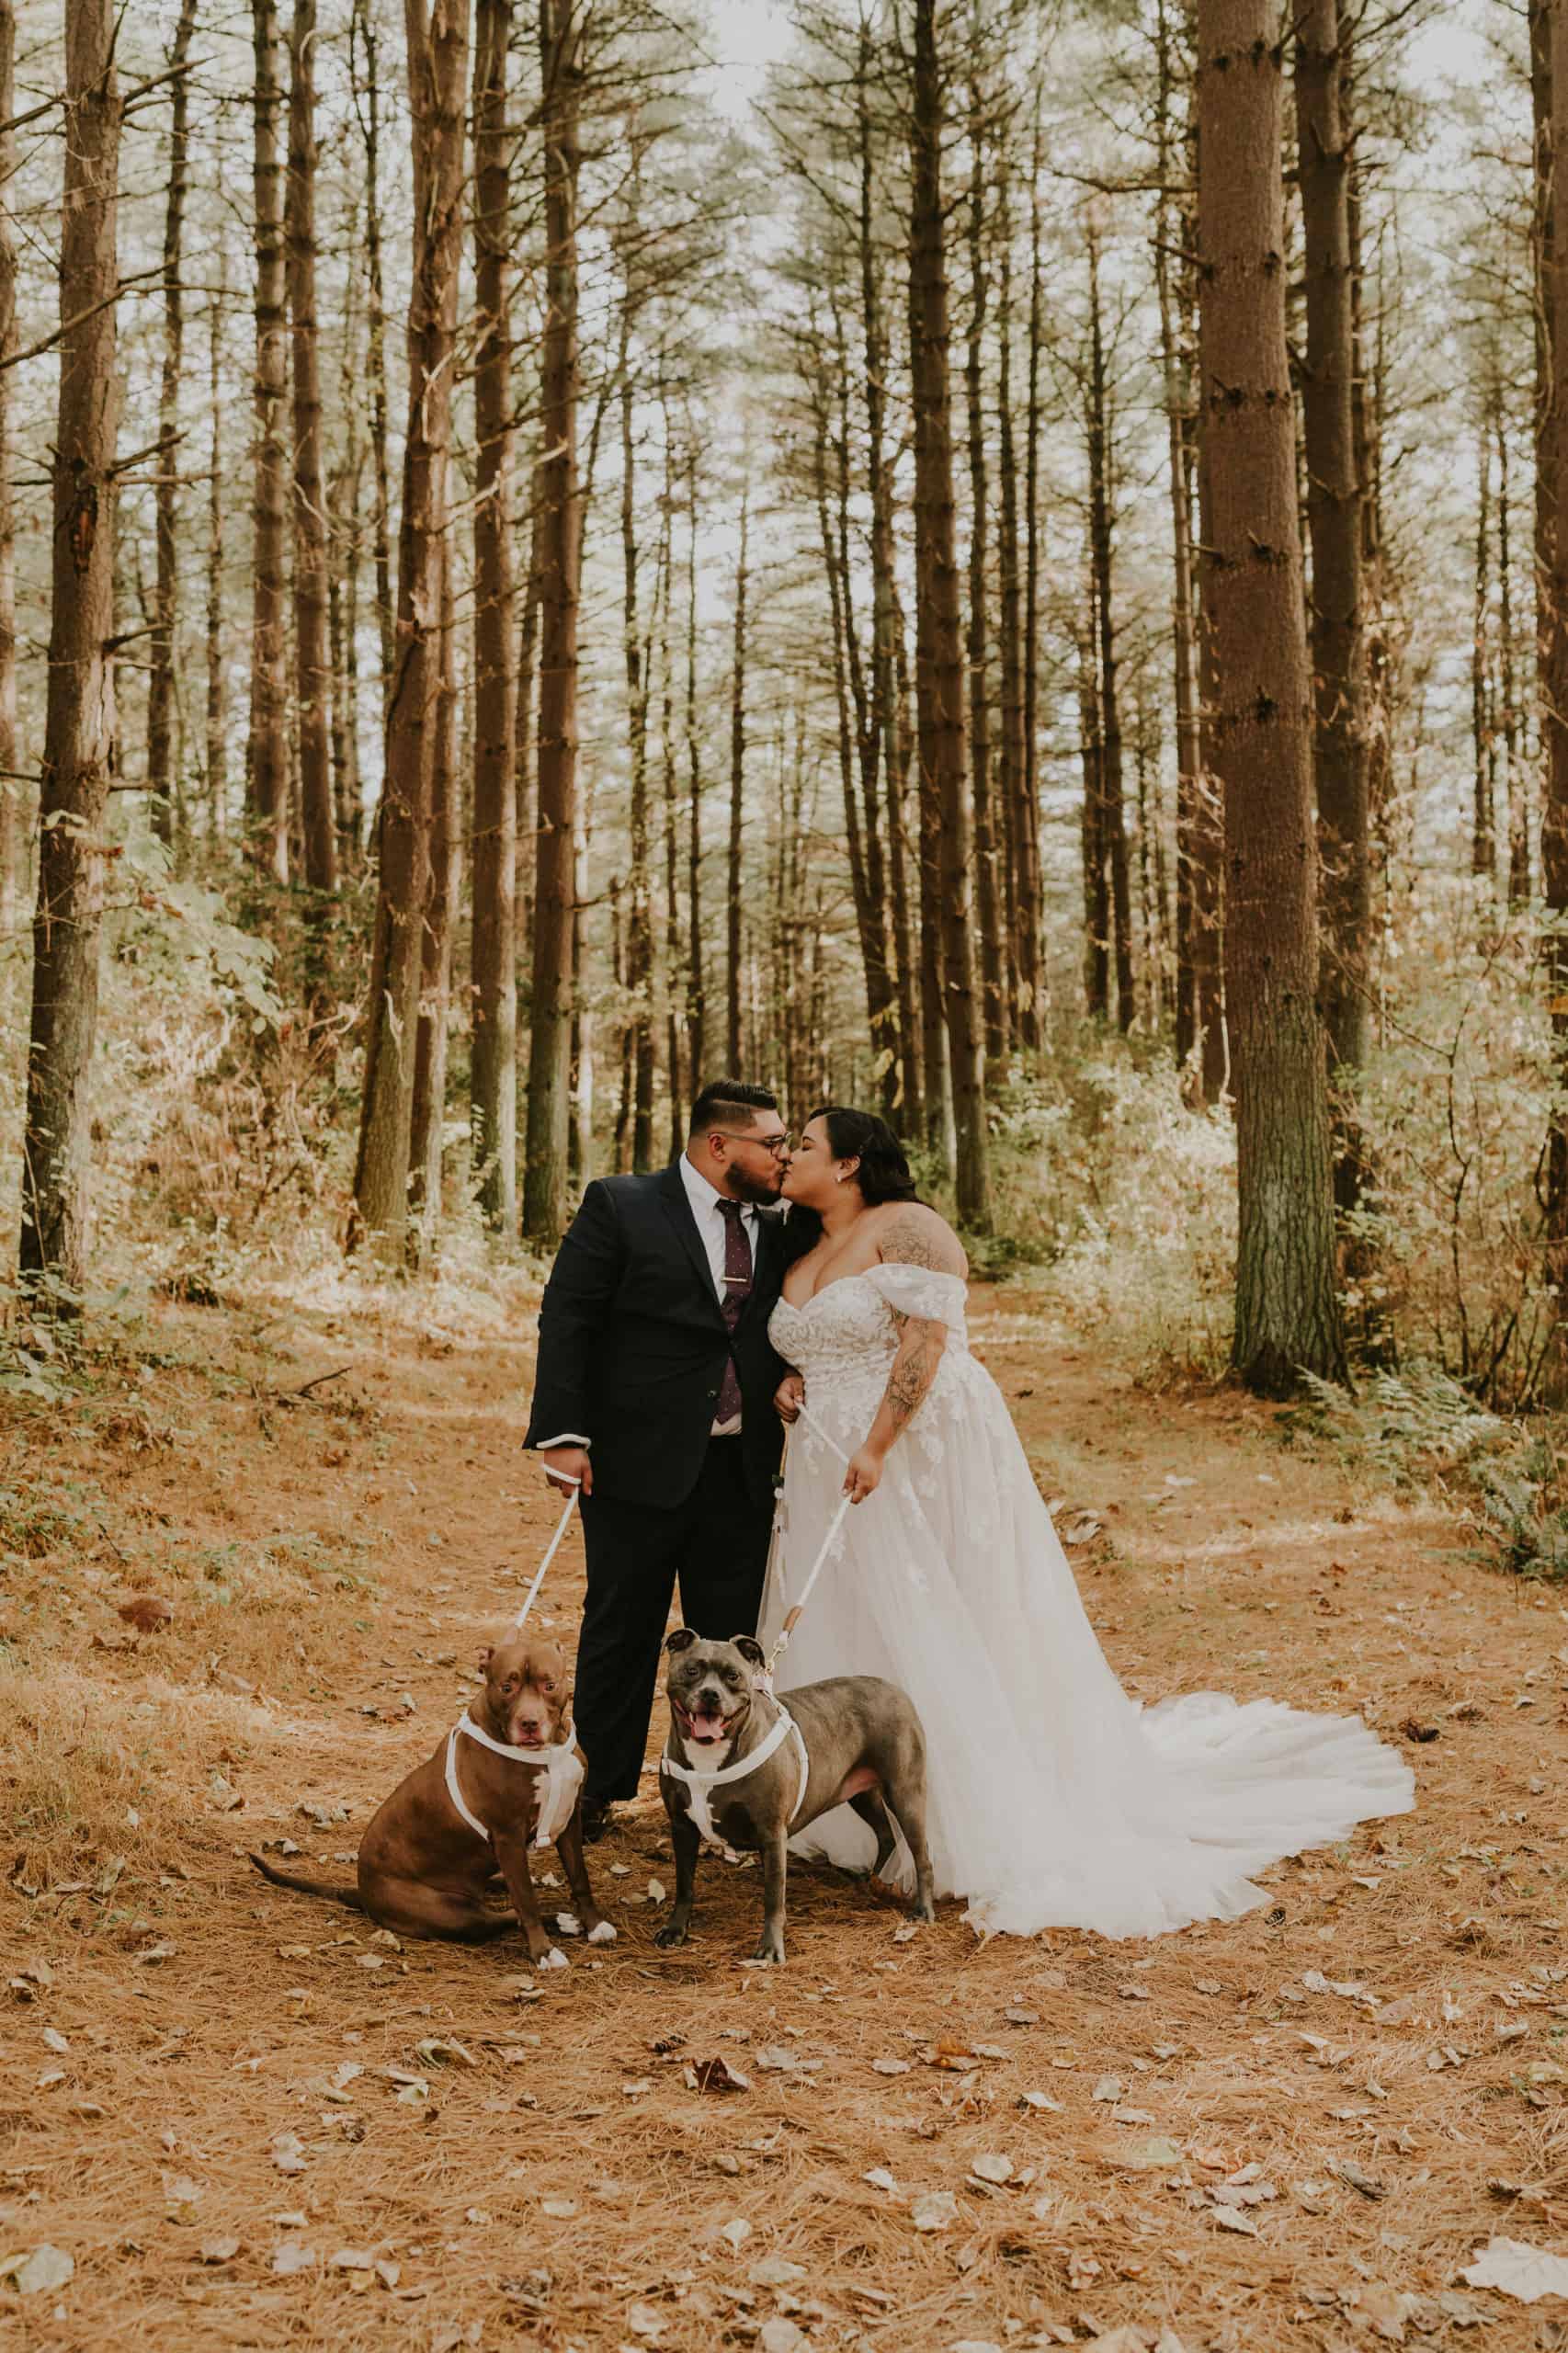 Maryland Forest Elopement at Golden Hour